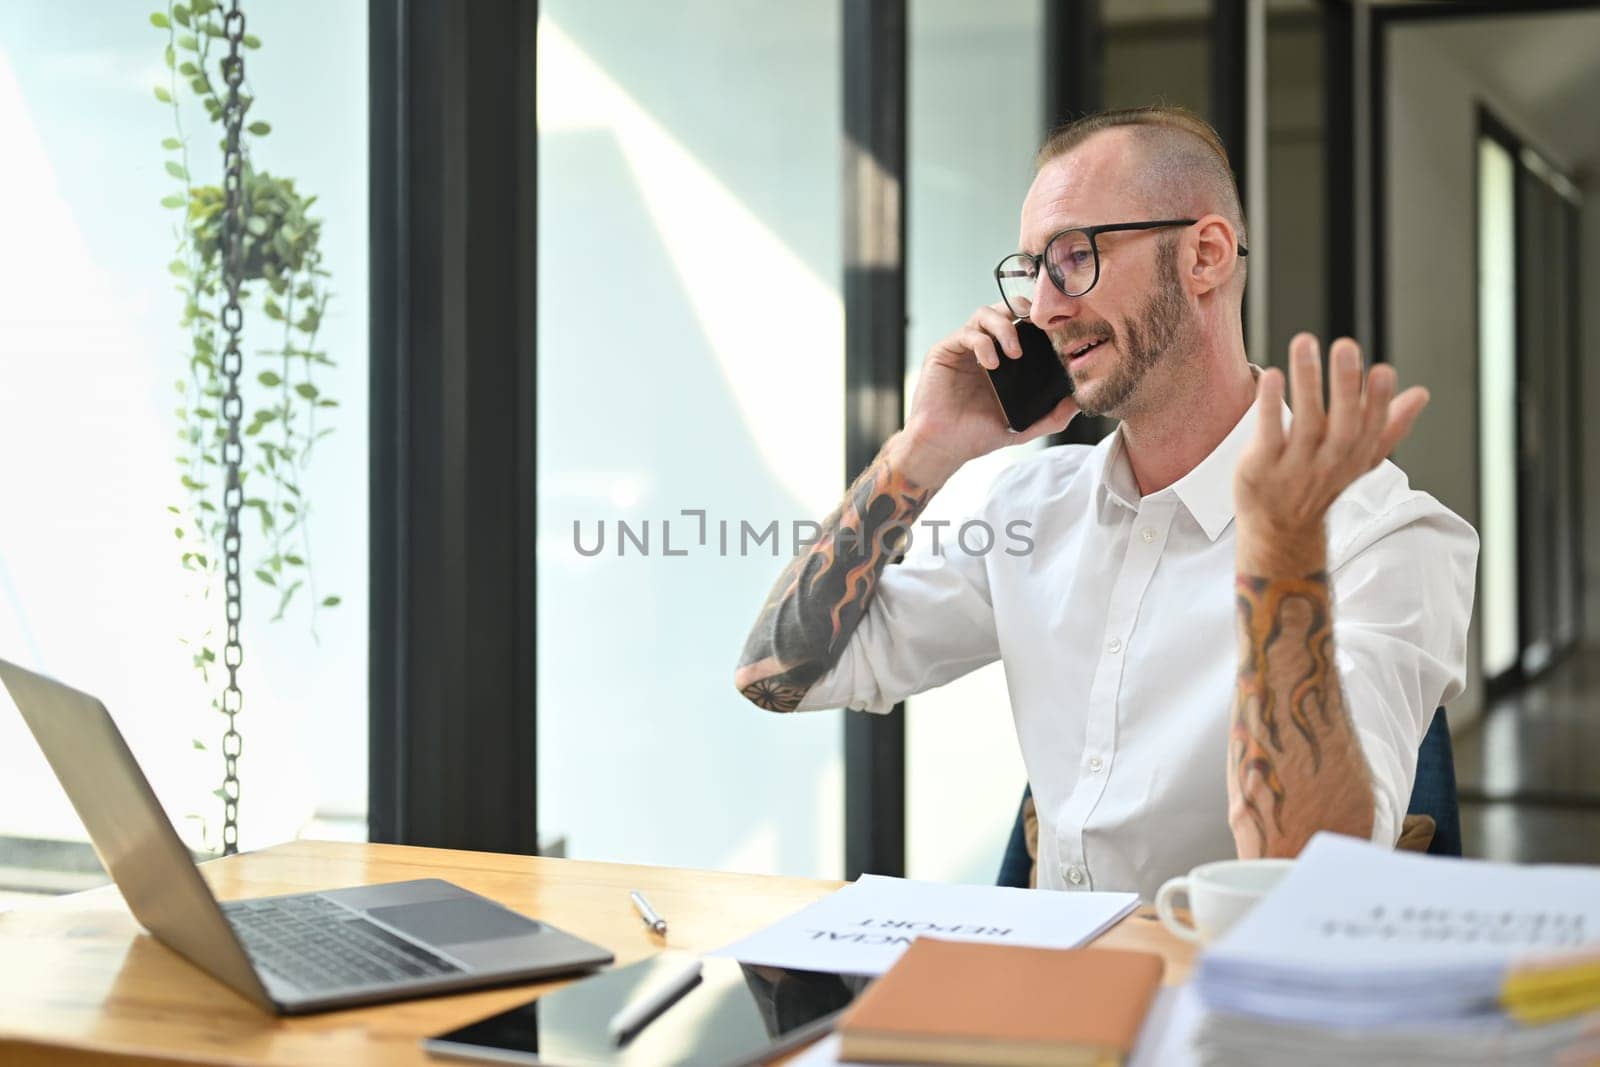 Confident male manager wearing glasses and white shirt talking on phone at office desk with laptop.